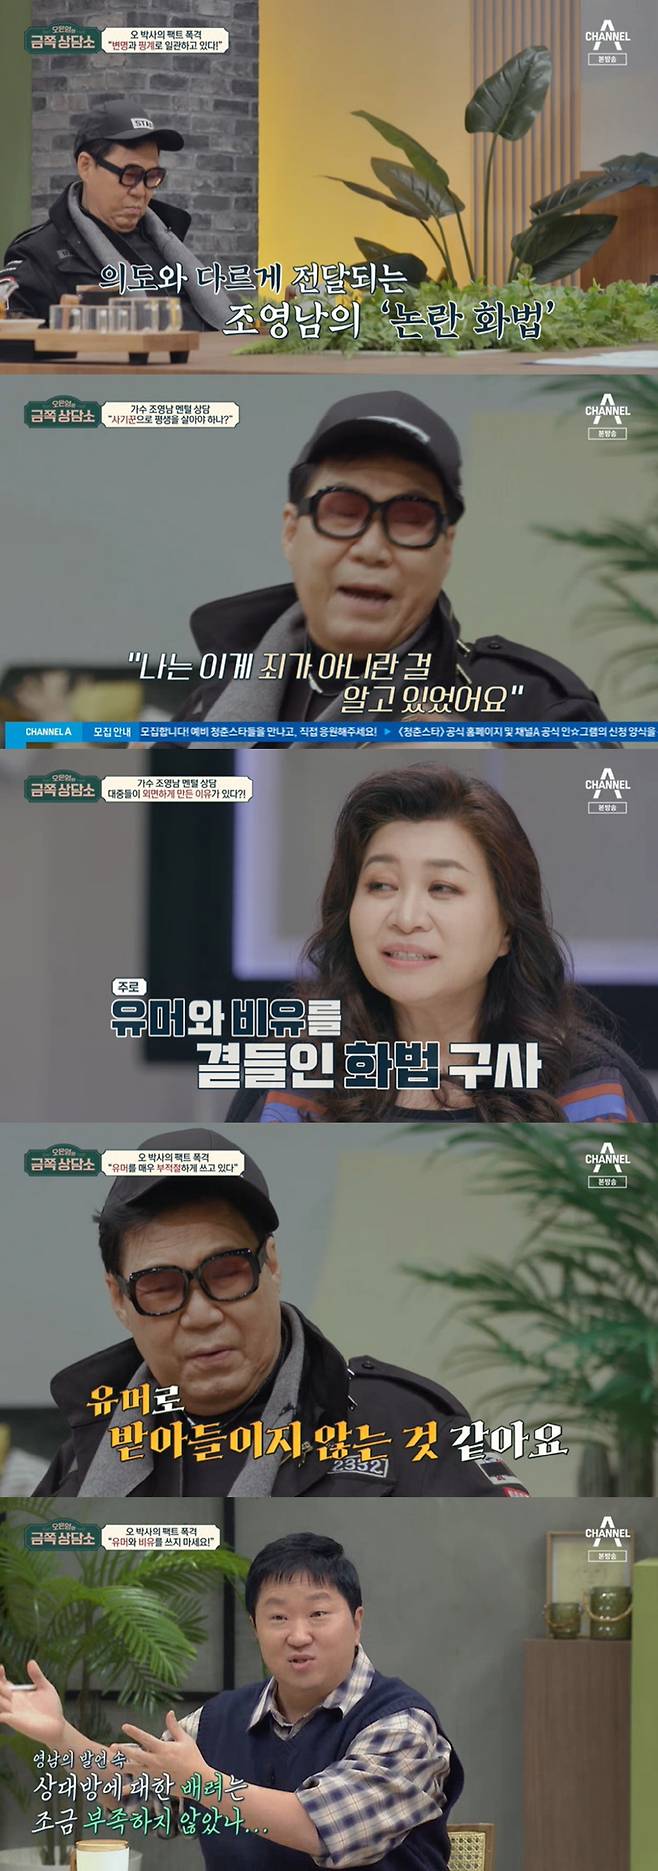 Gold Counseling Center Cho Young-nam took a moment of humor and confessed his true heart.On the 4th, Channel A entertainment program Oh Eun-youngs Gold Counseling Center appeared as a guest of 78 years old oldest customer Cho Young-nam.Cho Young-nam told Park Na-rae, who reads the results of the preliminary test, I have not received the trial for five years.When the judge read the ruling, he said, But I gave two years of probation for 10 months in prison.This was not the only controversy. The pro-Japanese controversy was raised by other remarks. Cho Young-nam said, This is the worst guy,I havent done anything in two years since, he said, unjust.As for the controversy over the final acquittal of the painting, There is a work that cut the painting and made it like a collage.When I first cut off the real fire, people liked it, so I told my assistant to draw it the same.It is a picture with my autograph, but it is a little different from One, and the prosecution said it was a masterpiece. Business painters use all the assistants.I said that I could use an assistant in the Supreme Court One. You are not cowardly and fearless; you are not avoiding questions; you are not filtered, said Oh Eun Young, who heard Chos speech.Oh Eun Young said, I think there are three controversies in common: I understand the teachers intention, but the speech itself is a controversial speech.I will explain this in detail, he said, looking at and analyzing the public defense video of the Supreme Court One.Cho Young-nam, who watched the video together, said, That scene is the most shameful scene of my life. I did not want to cry, but I have accumulated for five years.Oh Eun Young recounted the publics misconceptions, saying, The public thinks of some universal and general standards and does not seem to consider that part.Oh Eun Young said, I do not have anything wrong, but I think I should think that subtle nuances can be bad for the public. Oh Eun Youngs sharp analysis did not shut his mouth.I had to refine the horse and that was the best I could do, said Cho Young-nam, who was thinking for a long time. I knew this was not a sin.But people already believed I was a fraud. I was embarrassed to talk about something. I could not live as a fraud forever. Stand in front of four Supreme Court justices.I was floating in front of Mr. Oh, and it was really bloody. Oh Eun Young said, I would have heard Feelings who were wrong in life. Cho Young-nam said, How could you bear it?My paintings have been promoted for five tough years, he continued another breathtaking statement.Oh Eun Young said, The teacher is a person with a lot of talent to say, so when he talks about a story that is openly repercussive, he has his own humor and analogy.But some people are not humoured, he said Careful.After hearing this, Cho Young-nam asked Oh Eun Young for an alternative to elegant revenge remarks and Oh Eun Young asked for his sincerity about the remarks.I was thinking, Youve become better than me, said Cho Young-nam, and Oh Eun Young said, You can say that then. I think its better not to write humor or analogy.After hearing the story for a long time, Jeong Hyeong-don also got lucky with Careful: I dont think you have any consideration for the other side.The teacher seems to be a person with wit, but the target person is not protected. Oh Eun Young presented Cho Young-nam with a new conversation method: a reverse pyramid conversation method that first talked about the most important conclusion.Oh Eun Young asked Cho Young-nam about the most regrettable thing he had lived in, and Cho Young-nam, who hesitated for a long time, said, The children were kicked out of the house when they were young.Cho said, I broke up with someone who lived with me, but why did not I know that there were children at that time? It is regrettable for the rest of my life and remains a guilt.But Cho Yeong-nam has never told his children this sorry heart.Cho Young-nam said, I think that I will not think of myself as a parent, so I do not even think about saying that or even listening.Oh Eun Young said, Parents are just parents. Good parents and wrong parents, but parents are just parents.If you have such a mind, it will help to express it in some form. Cho Young-nam said, I do not know that even if I do not say that, I think they know everything.I believe that I will understand everything, but I have never talked about it. Oh Eun Young said, Kid is different from me from birth.So if you dont tell me, I dont know, he said.